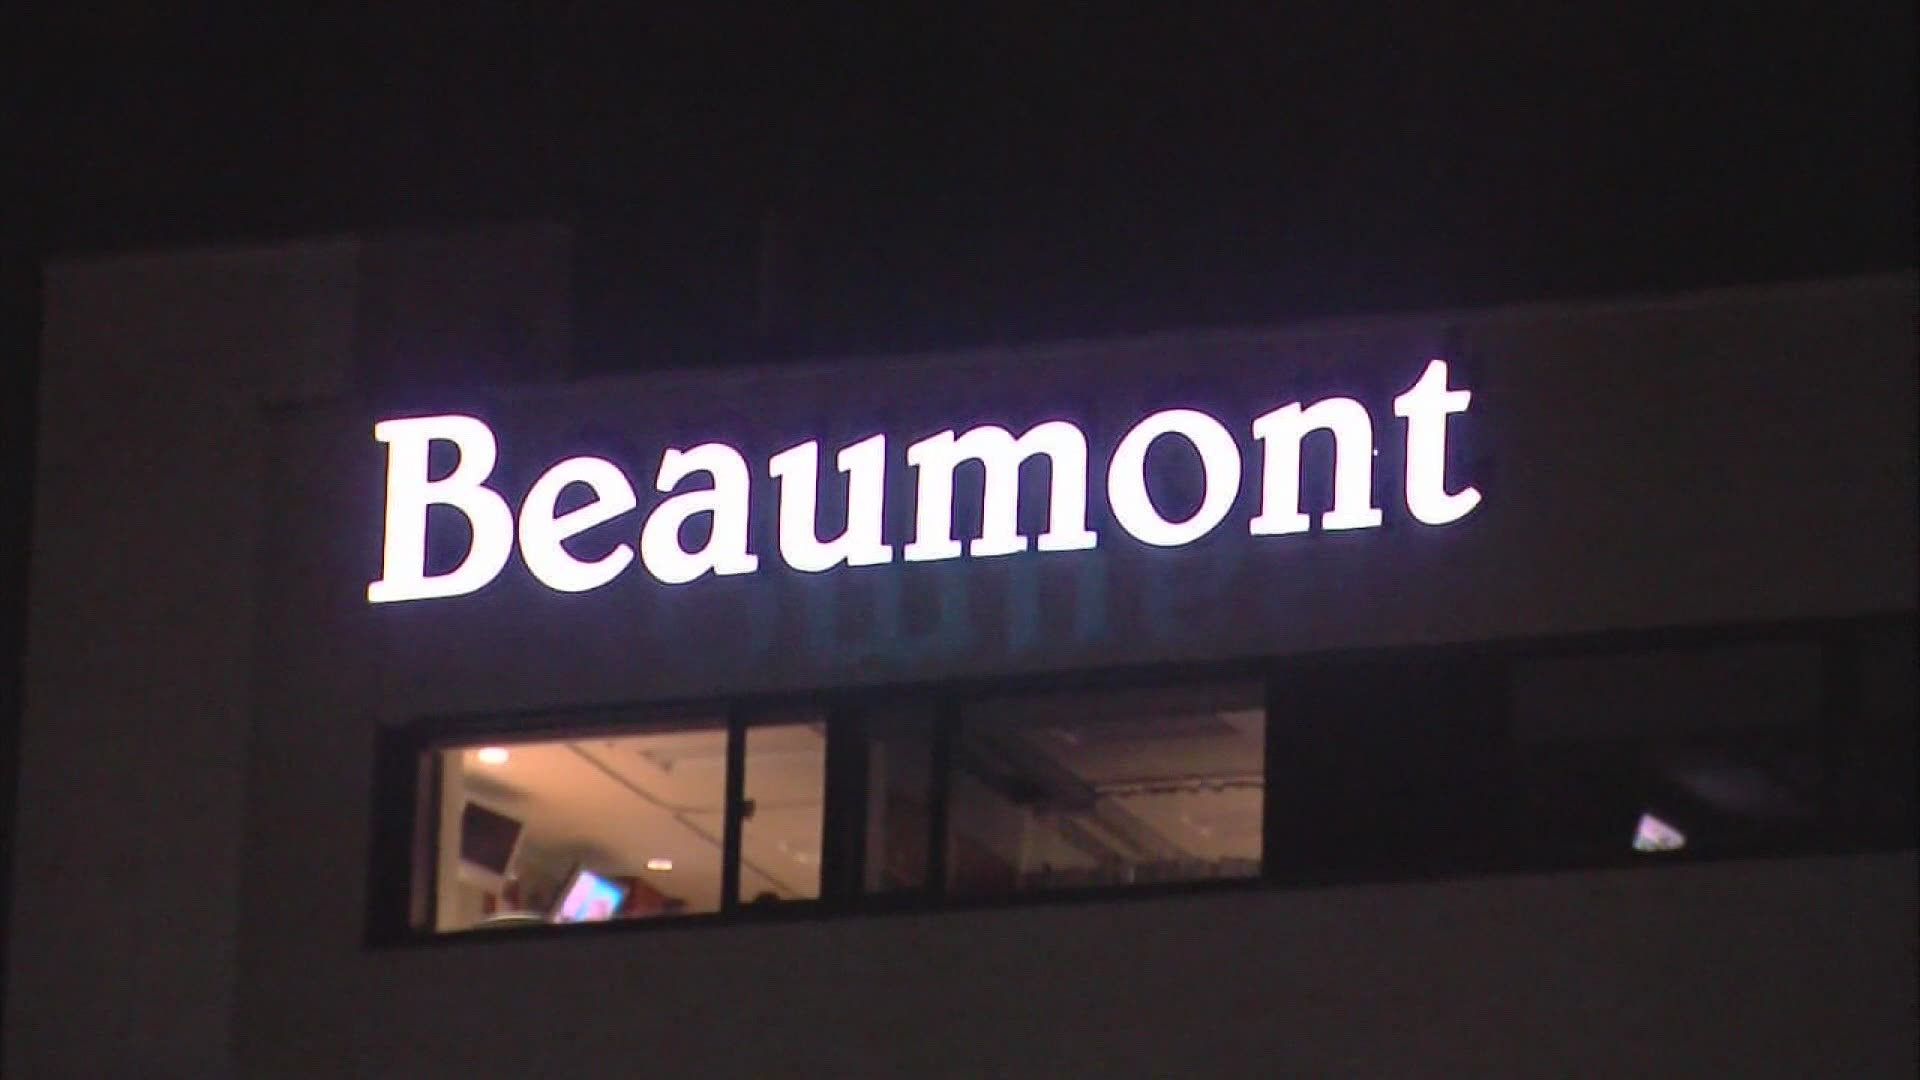 Spectrum Health and Beaumont Health announced Thursday they are planning to merge into one, new health system.